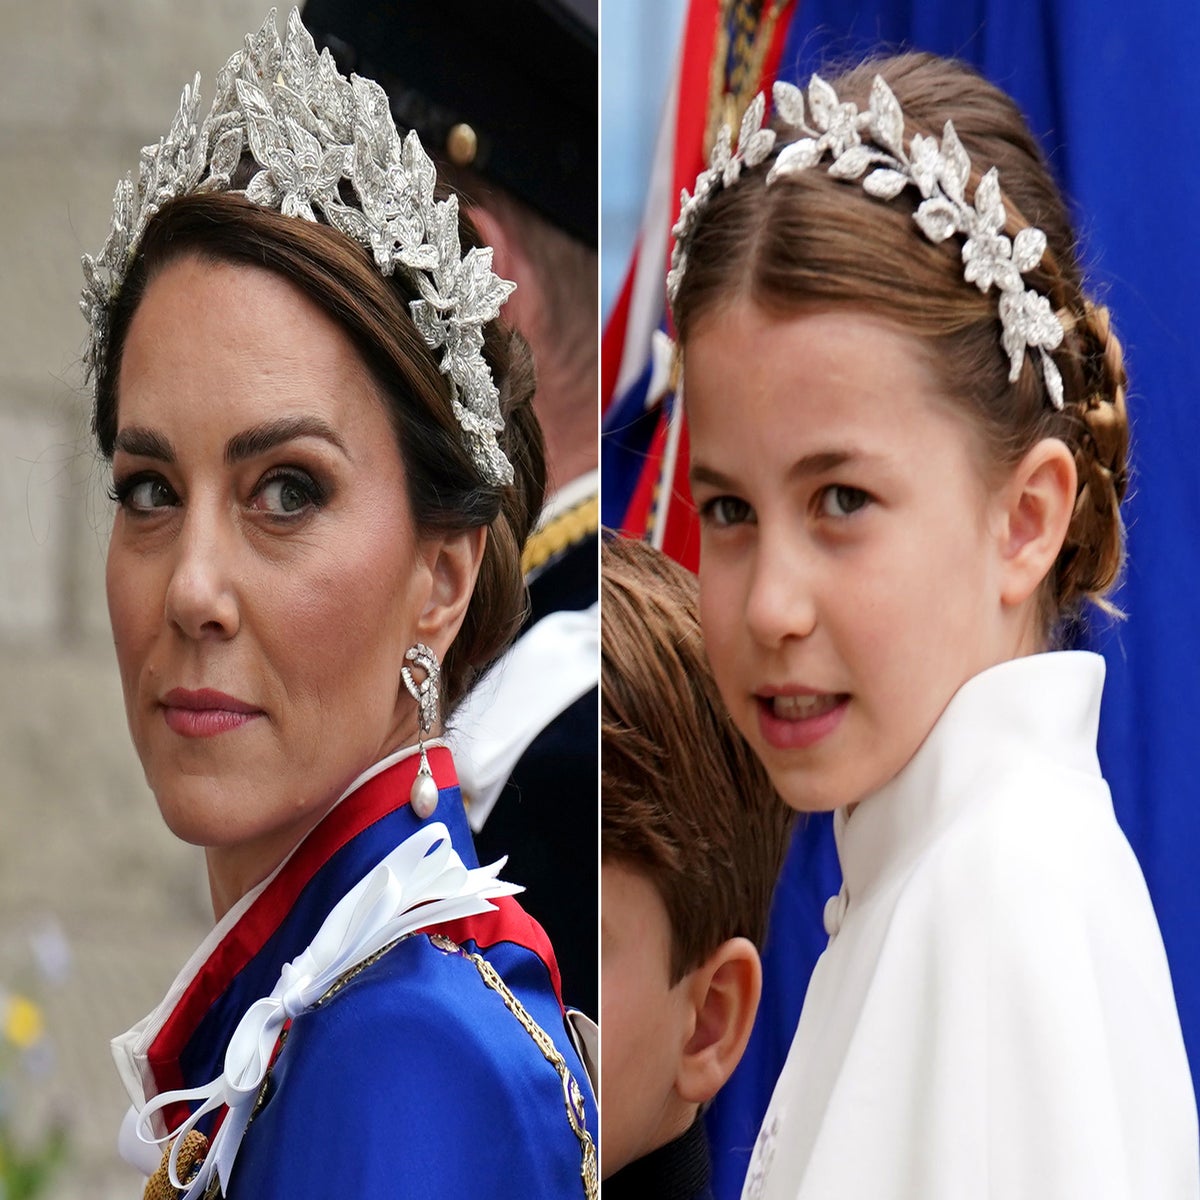 Kate Middleton's coronation tiara: Where is it from and how much